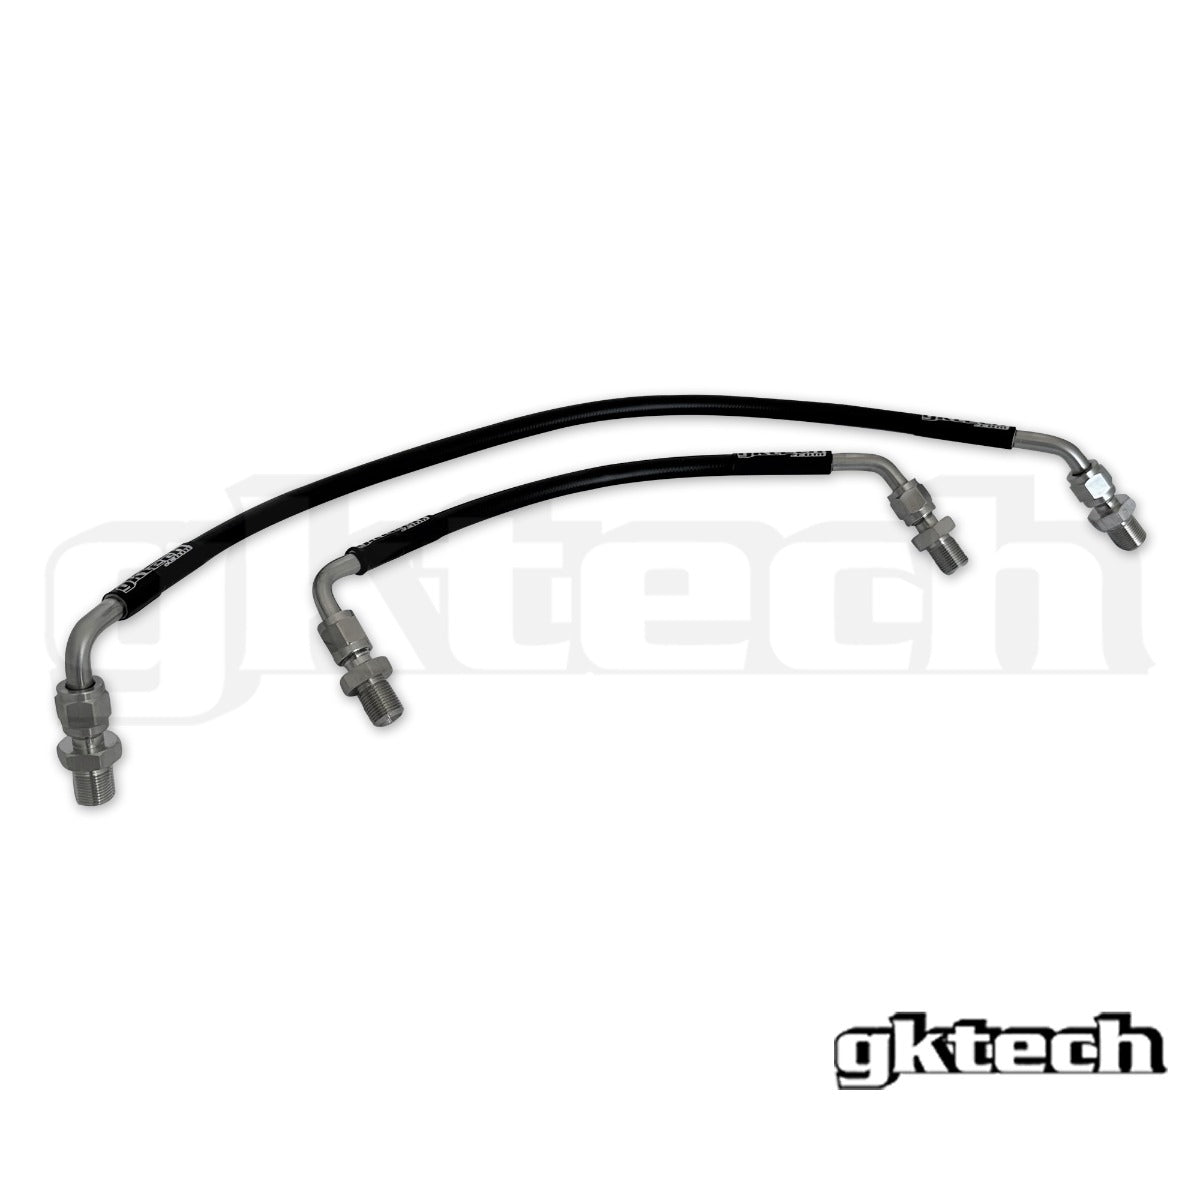 Z33 350z Power steering hard line replacements (pair)